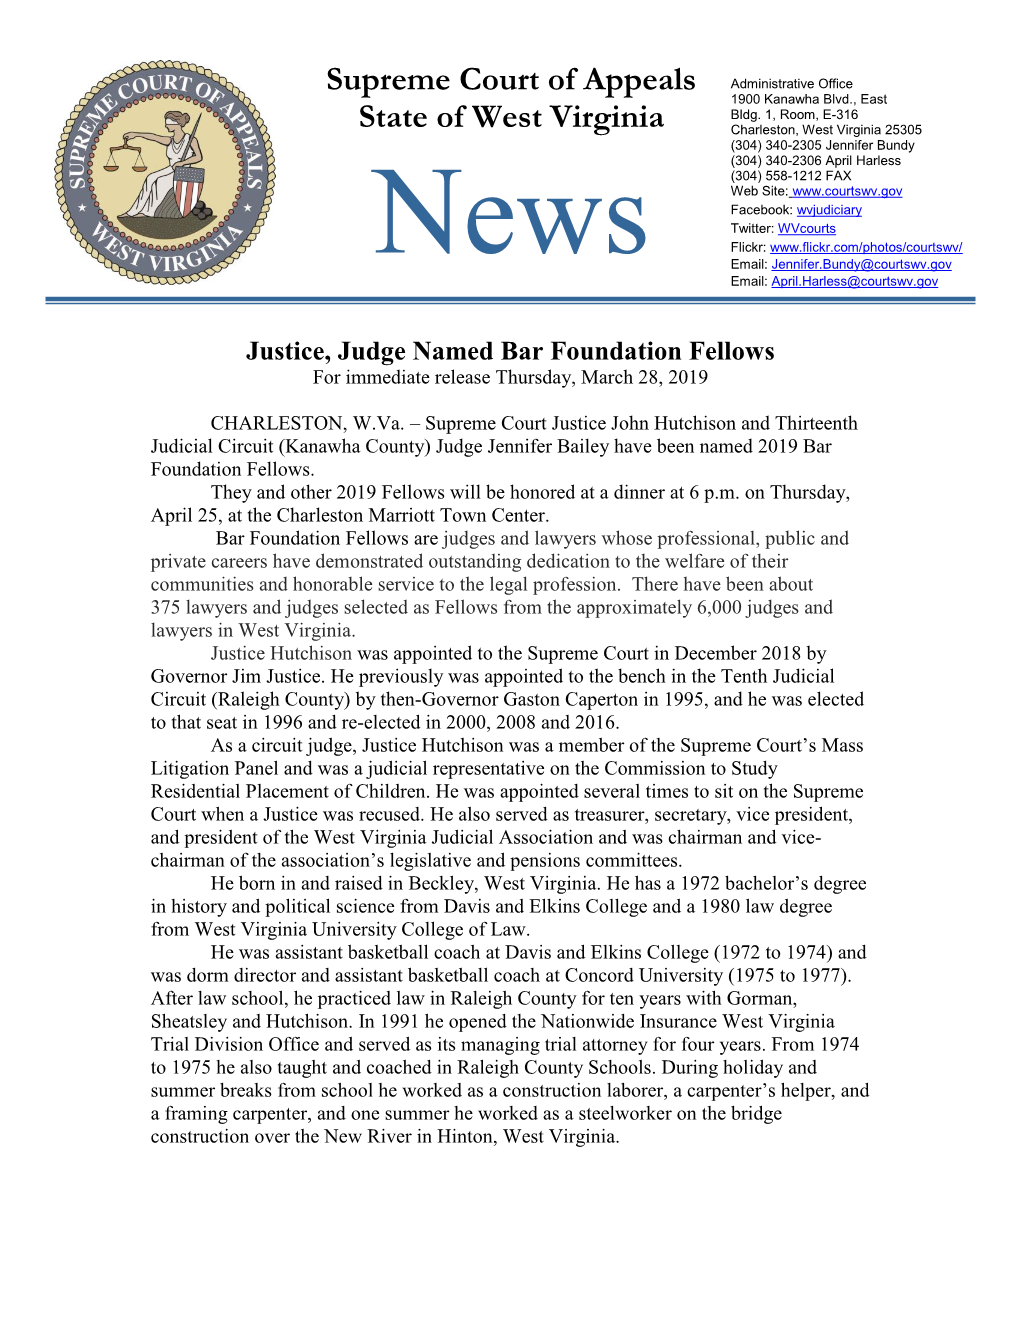 Justice, Judge Named Bar Foundation Fellows for Immediate Release Thursday, March 28, 2019